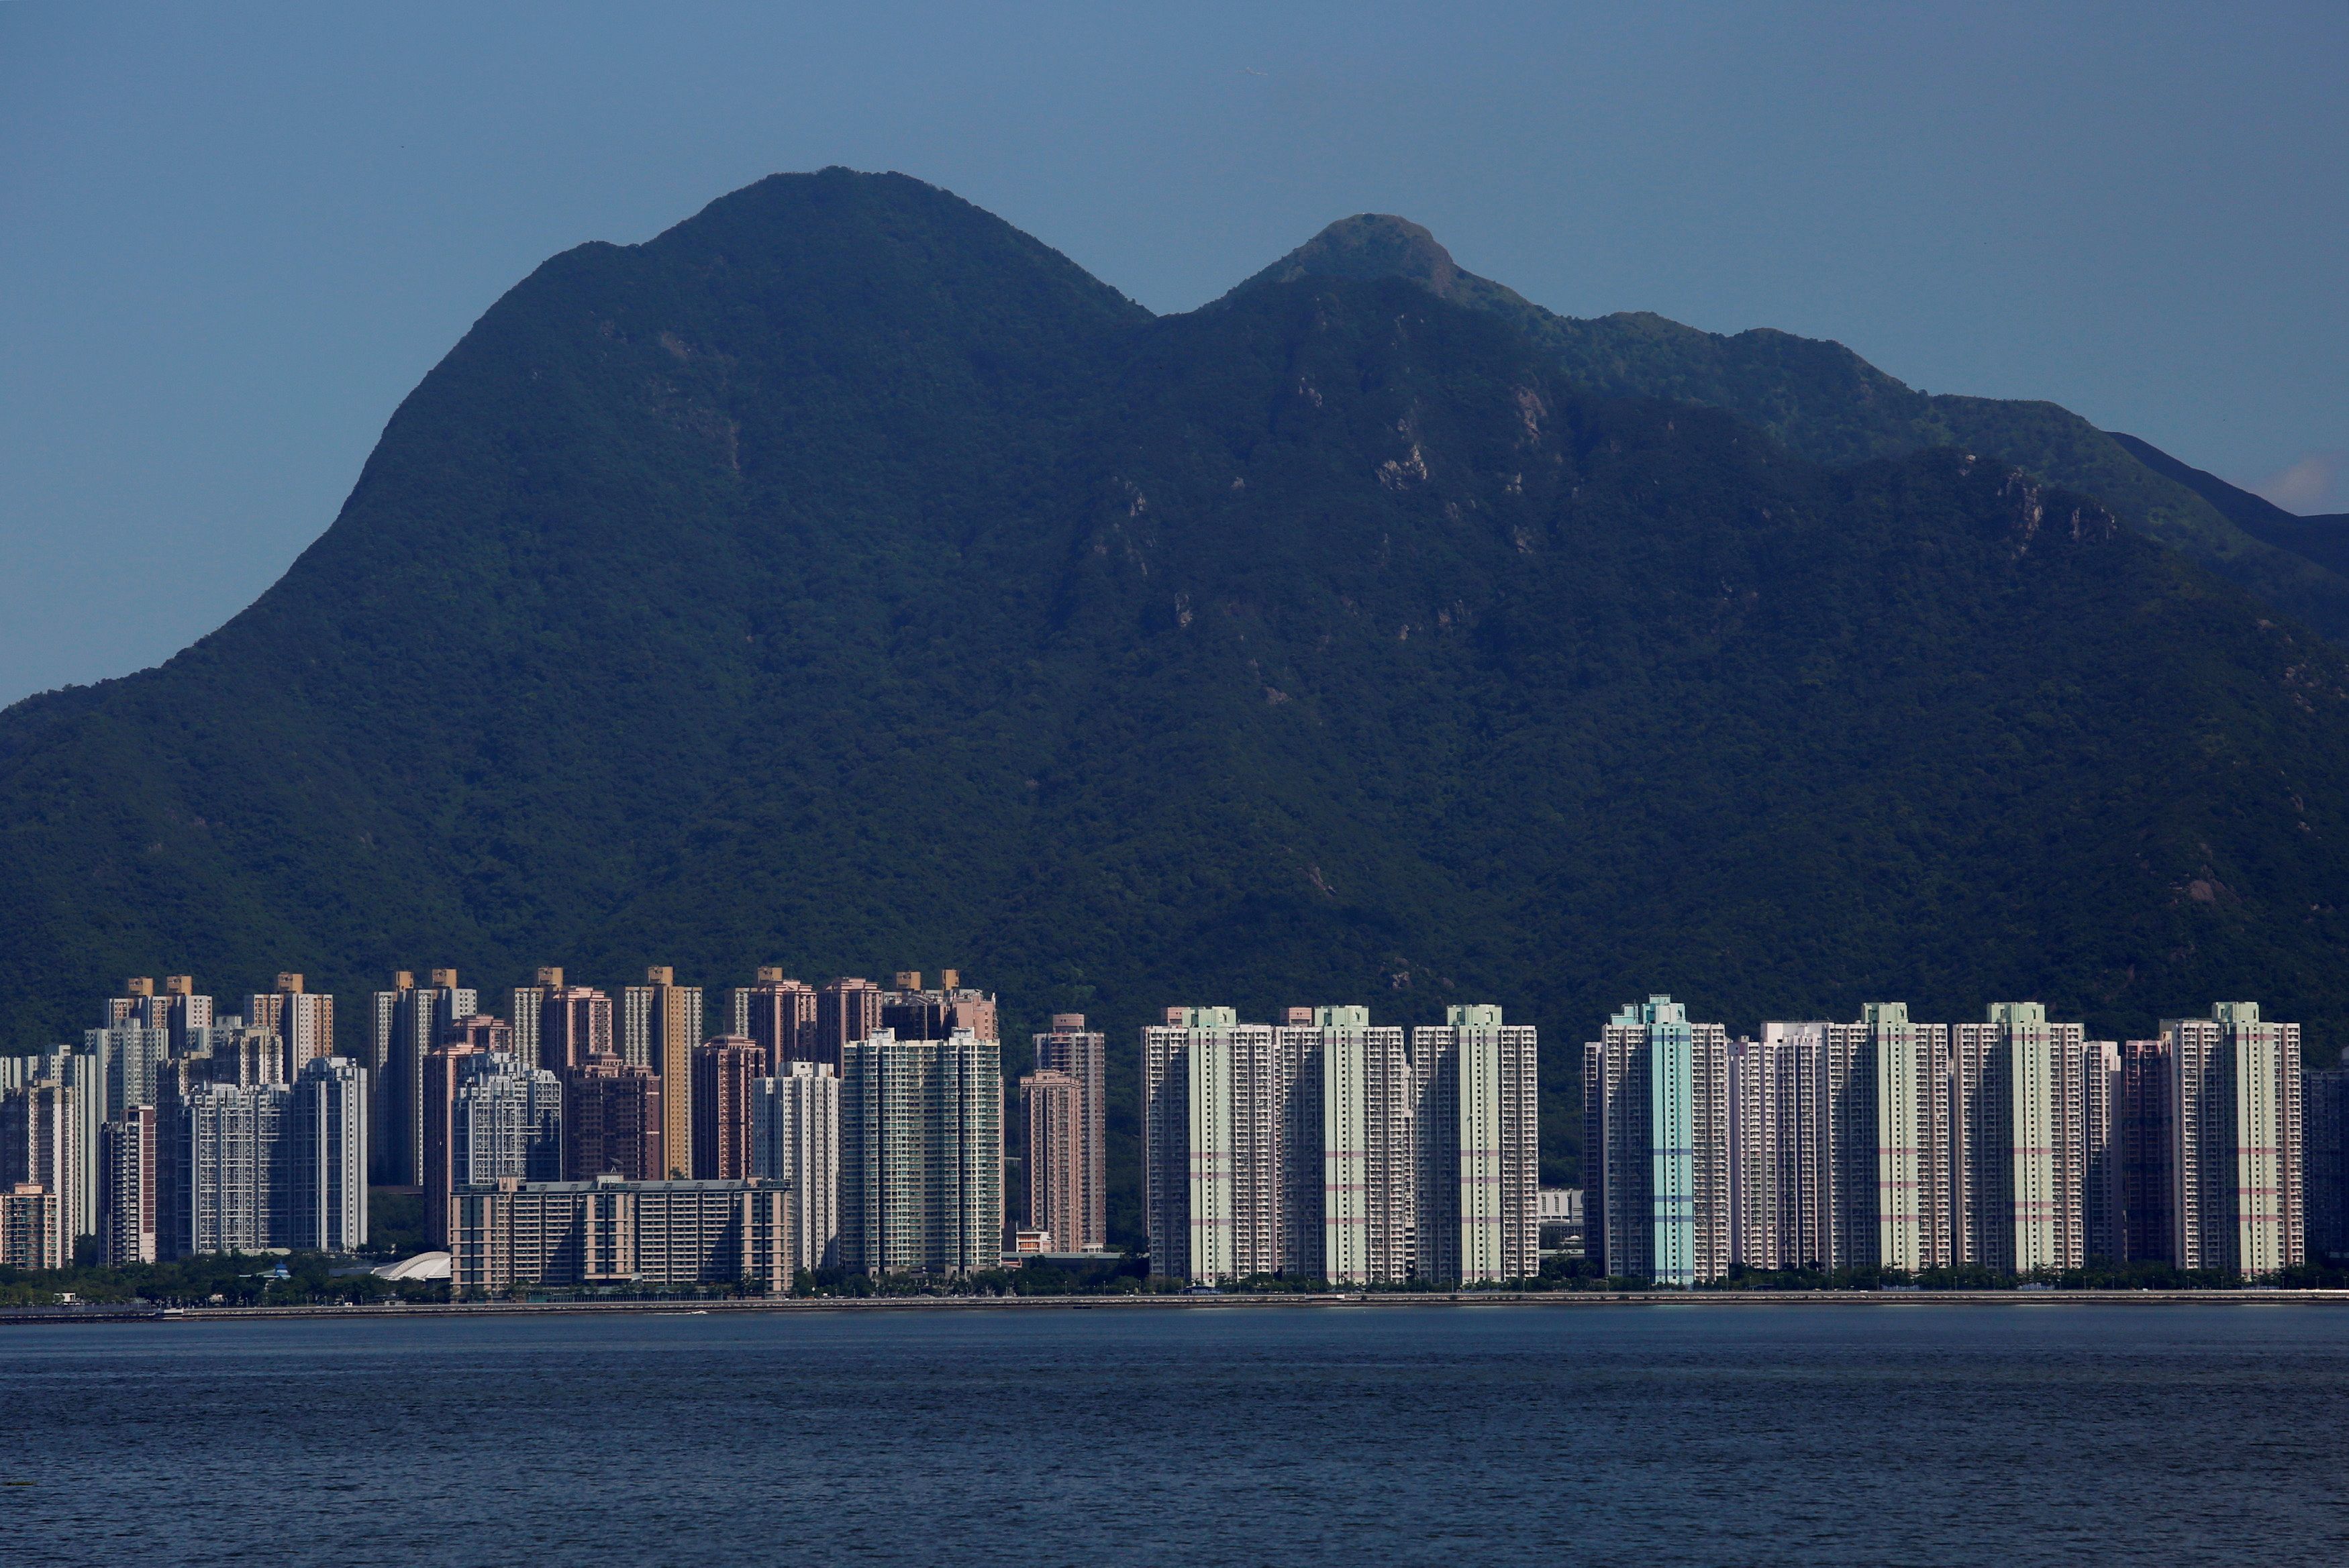 Residential apartments are seen under Ma On Shan peak in Hong Kong